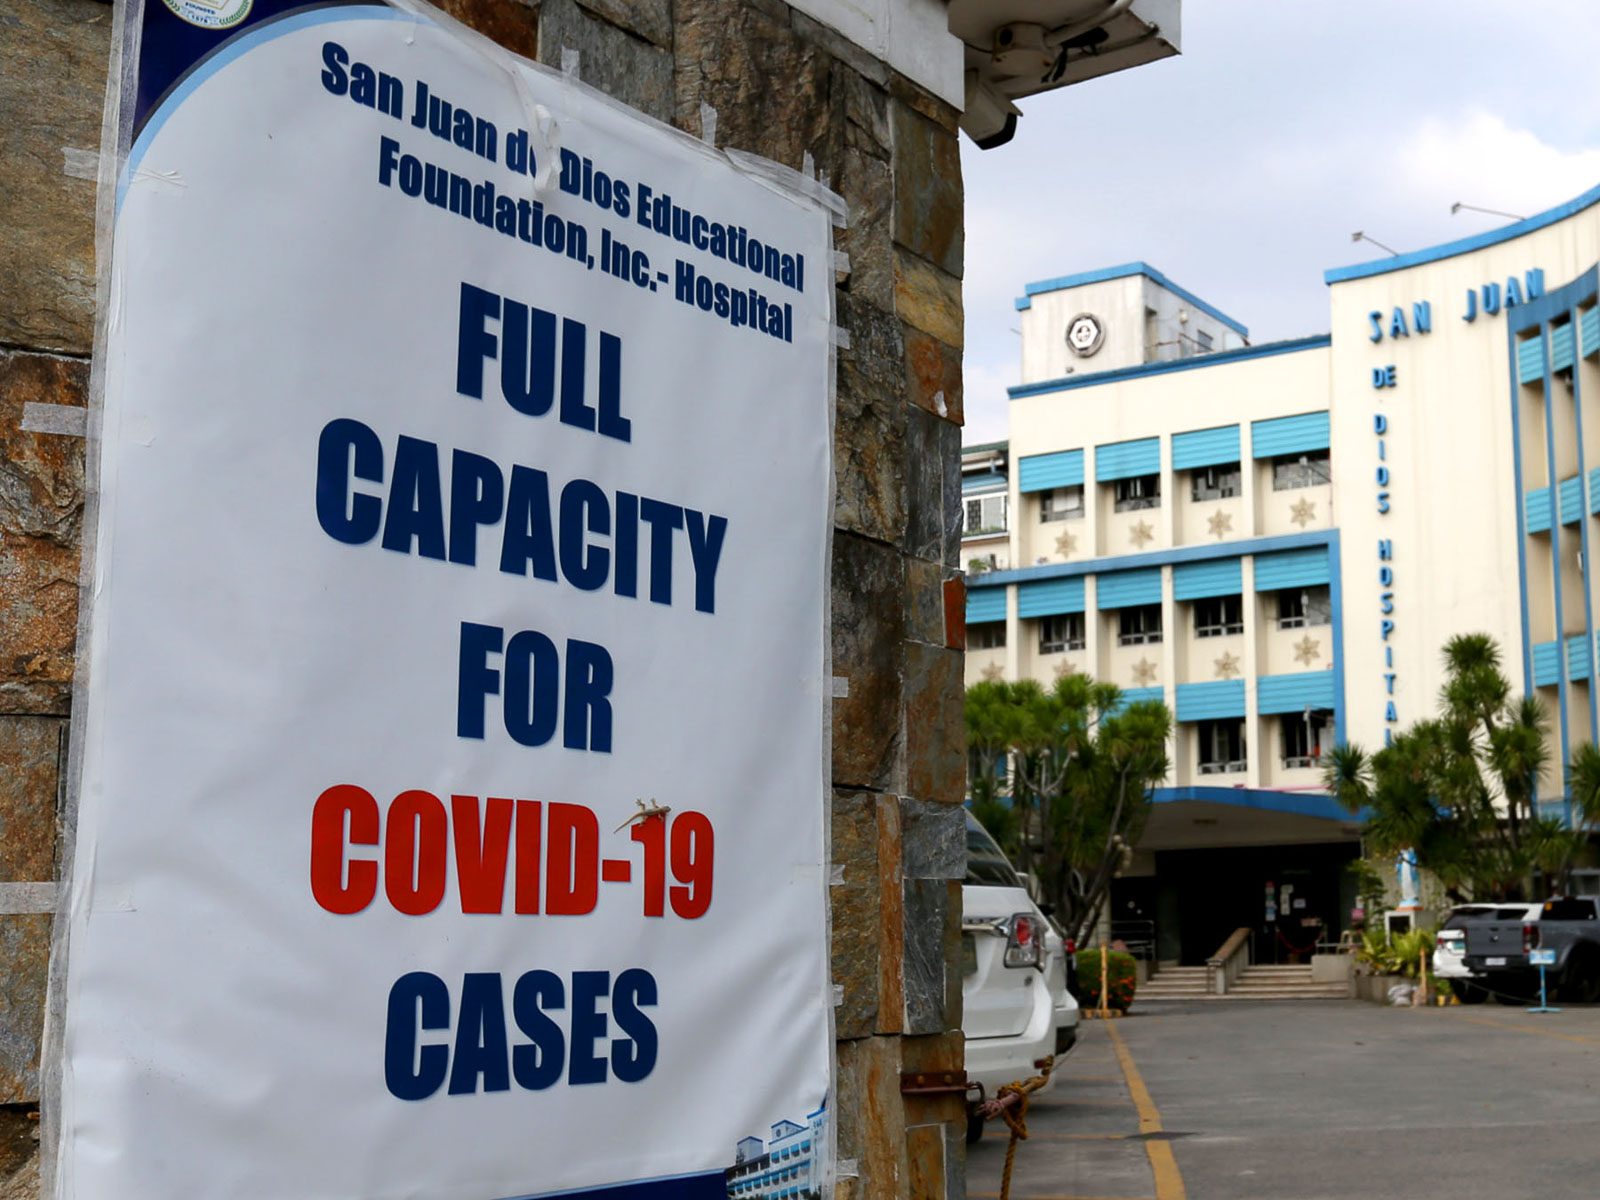 DOH reports 382 COVID-19 deaths, 9,373 new cases